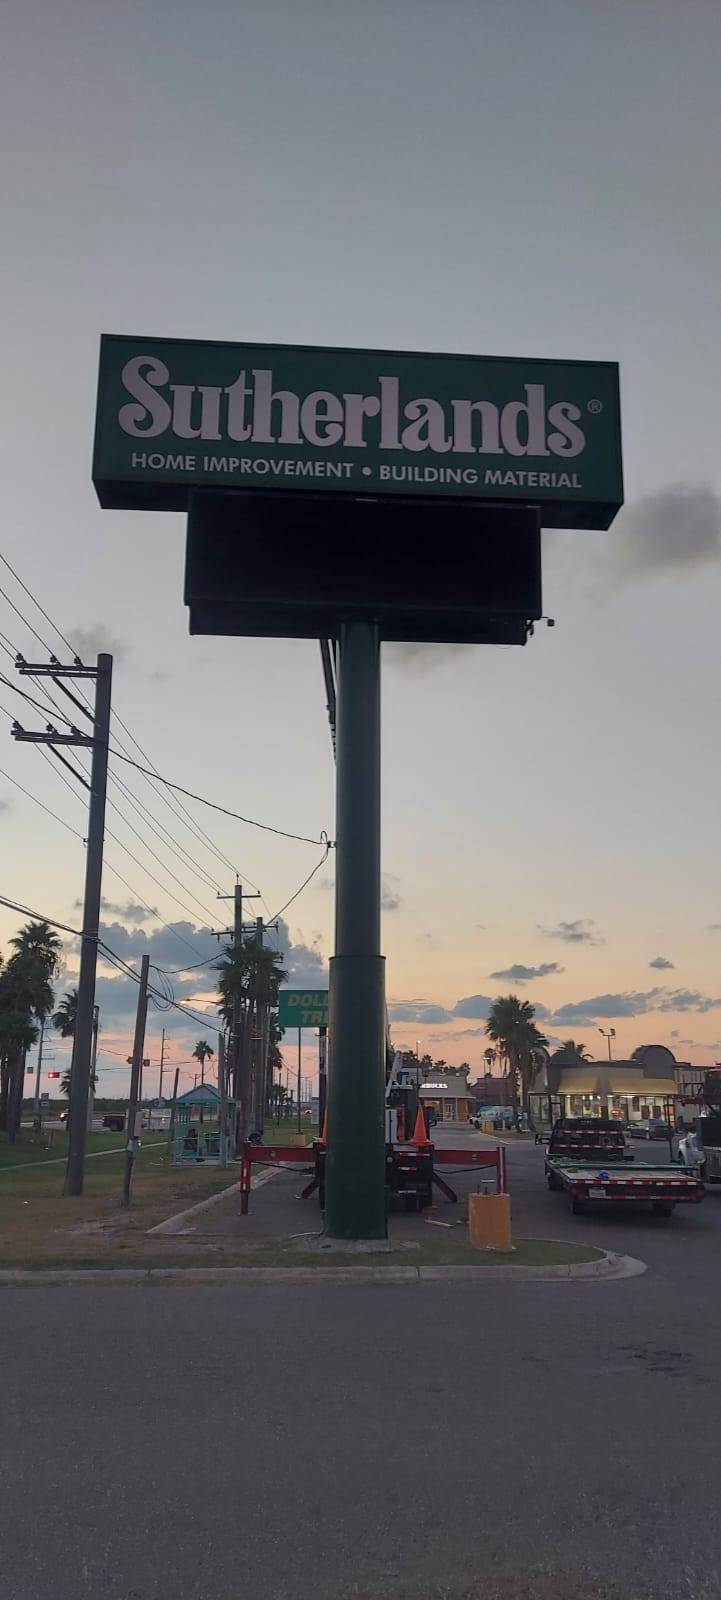 Elevated Sutherlands signage, enhancing visibility and brand recognition for the home improvement and building material store.